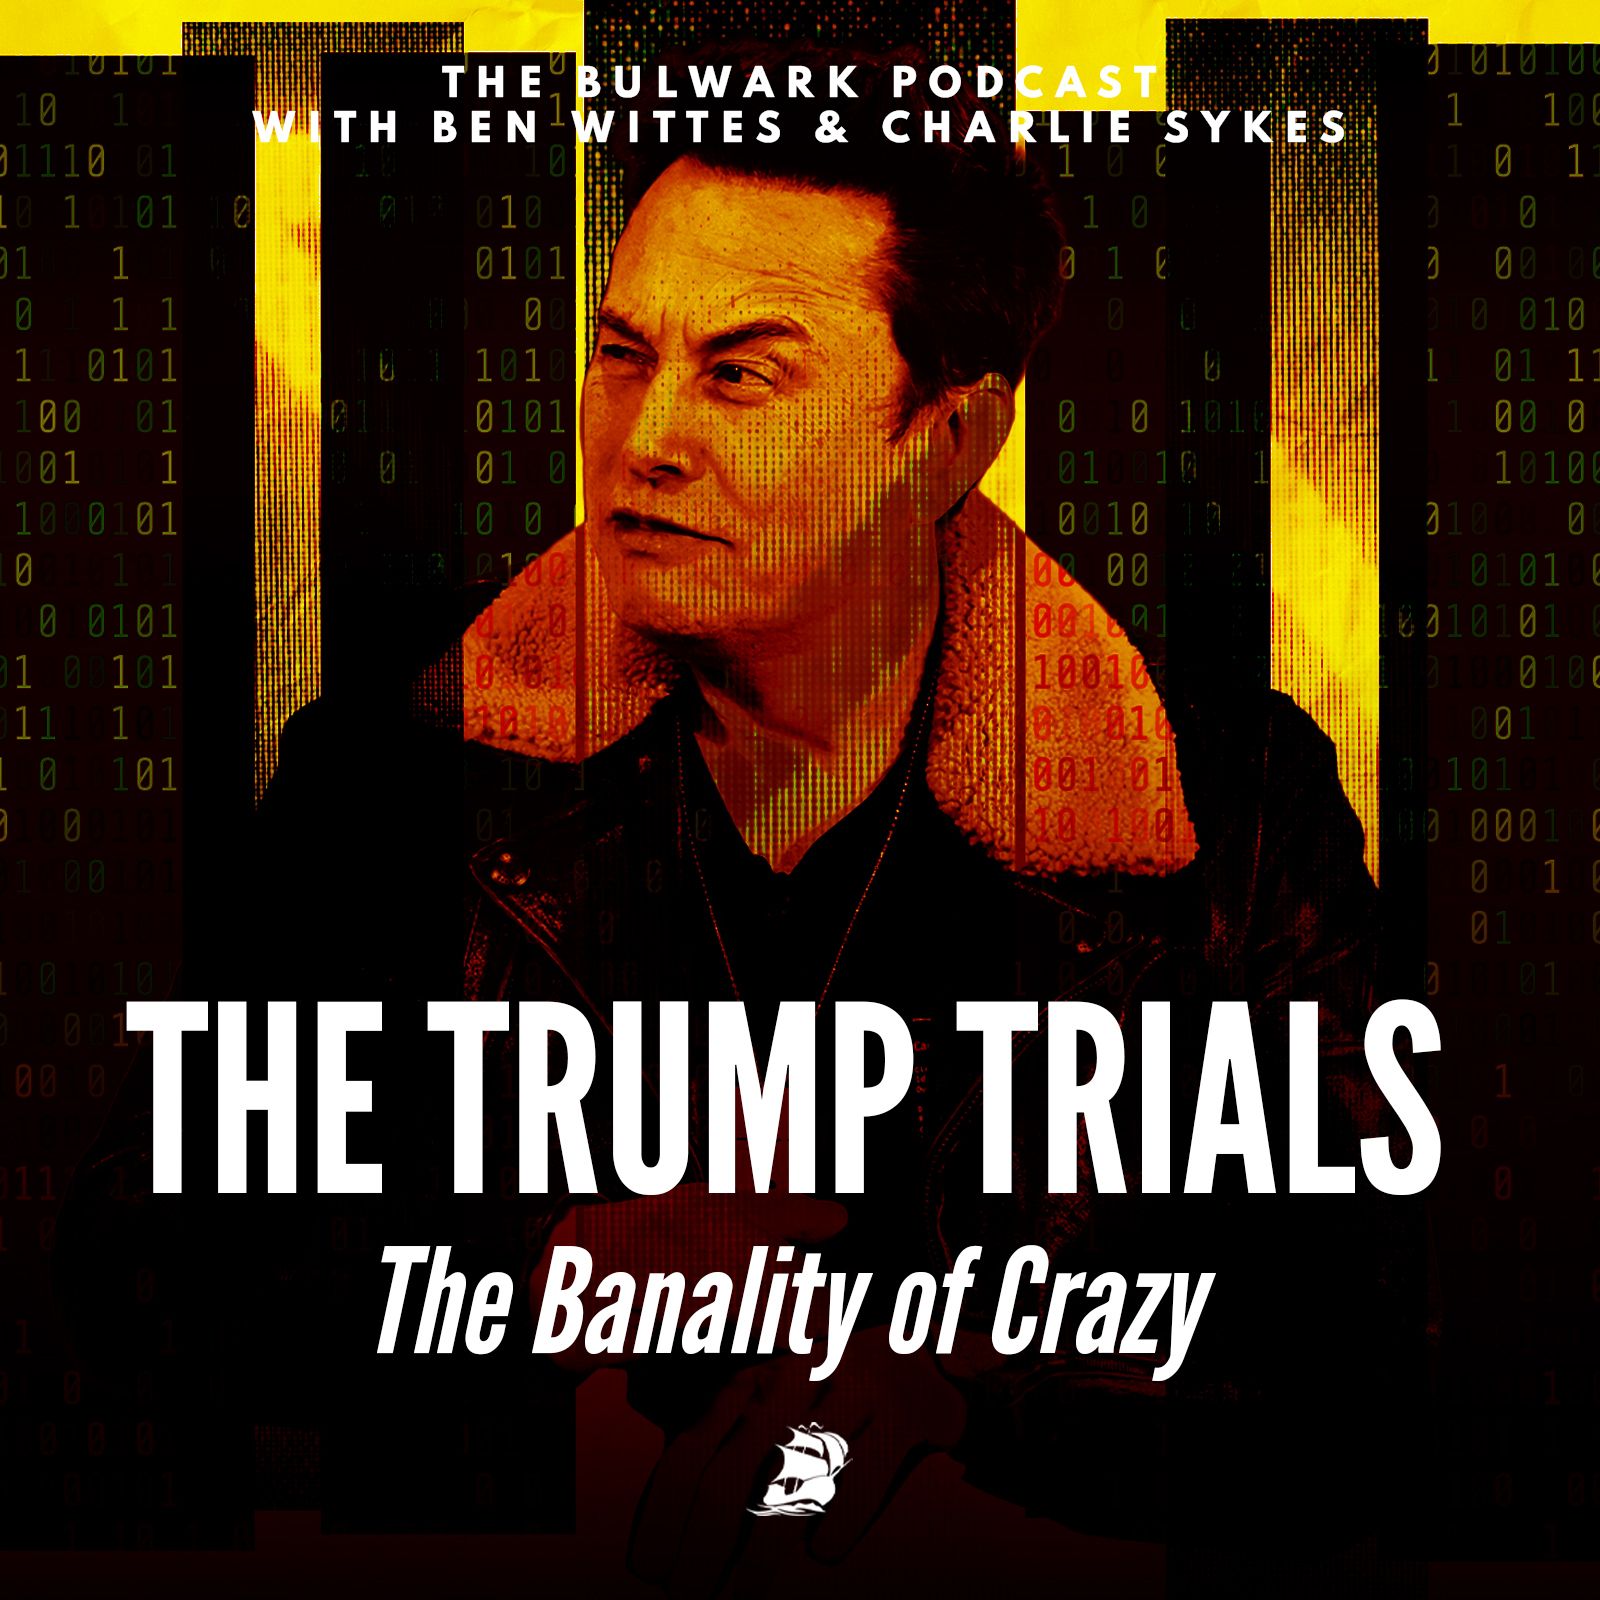 The Banality of Crazy by The Bulwark Podcast